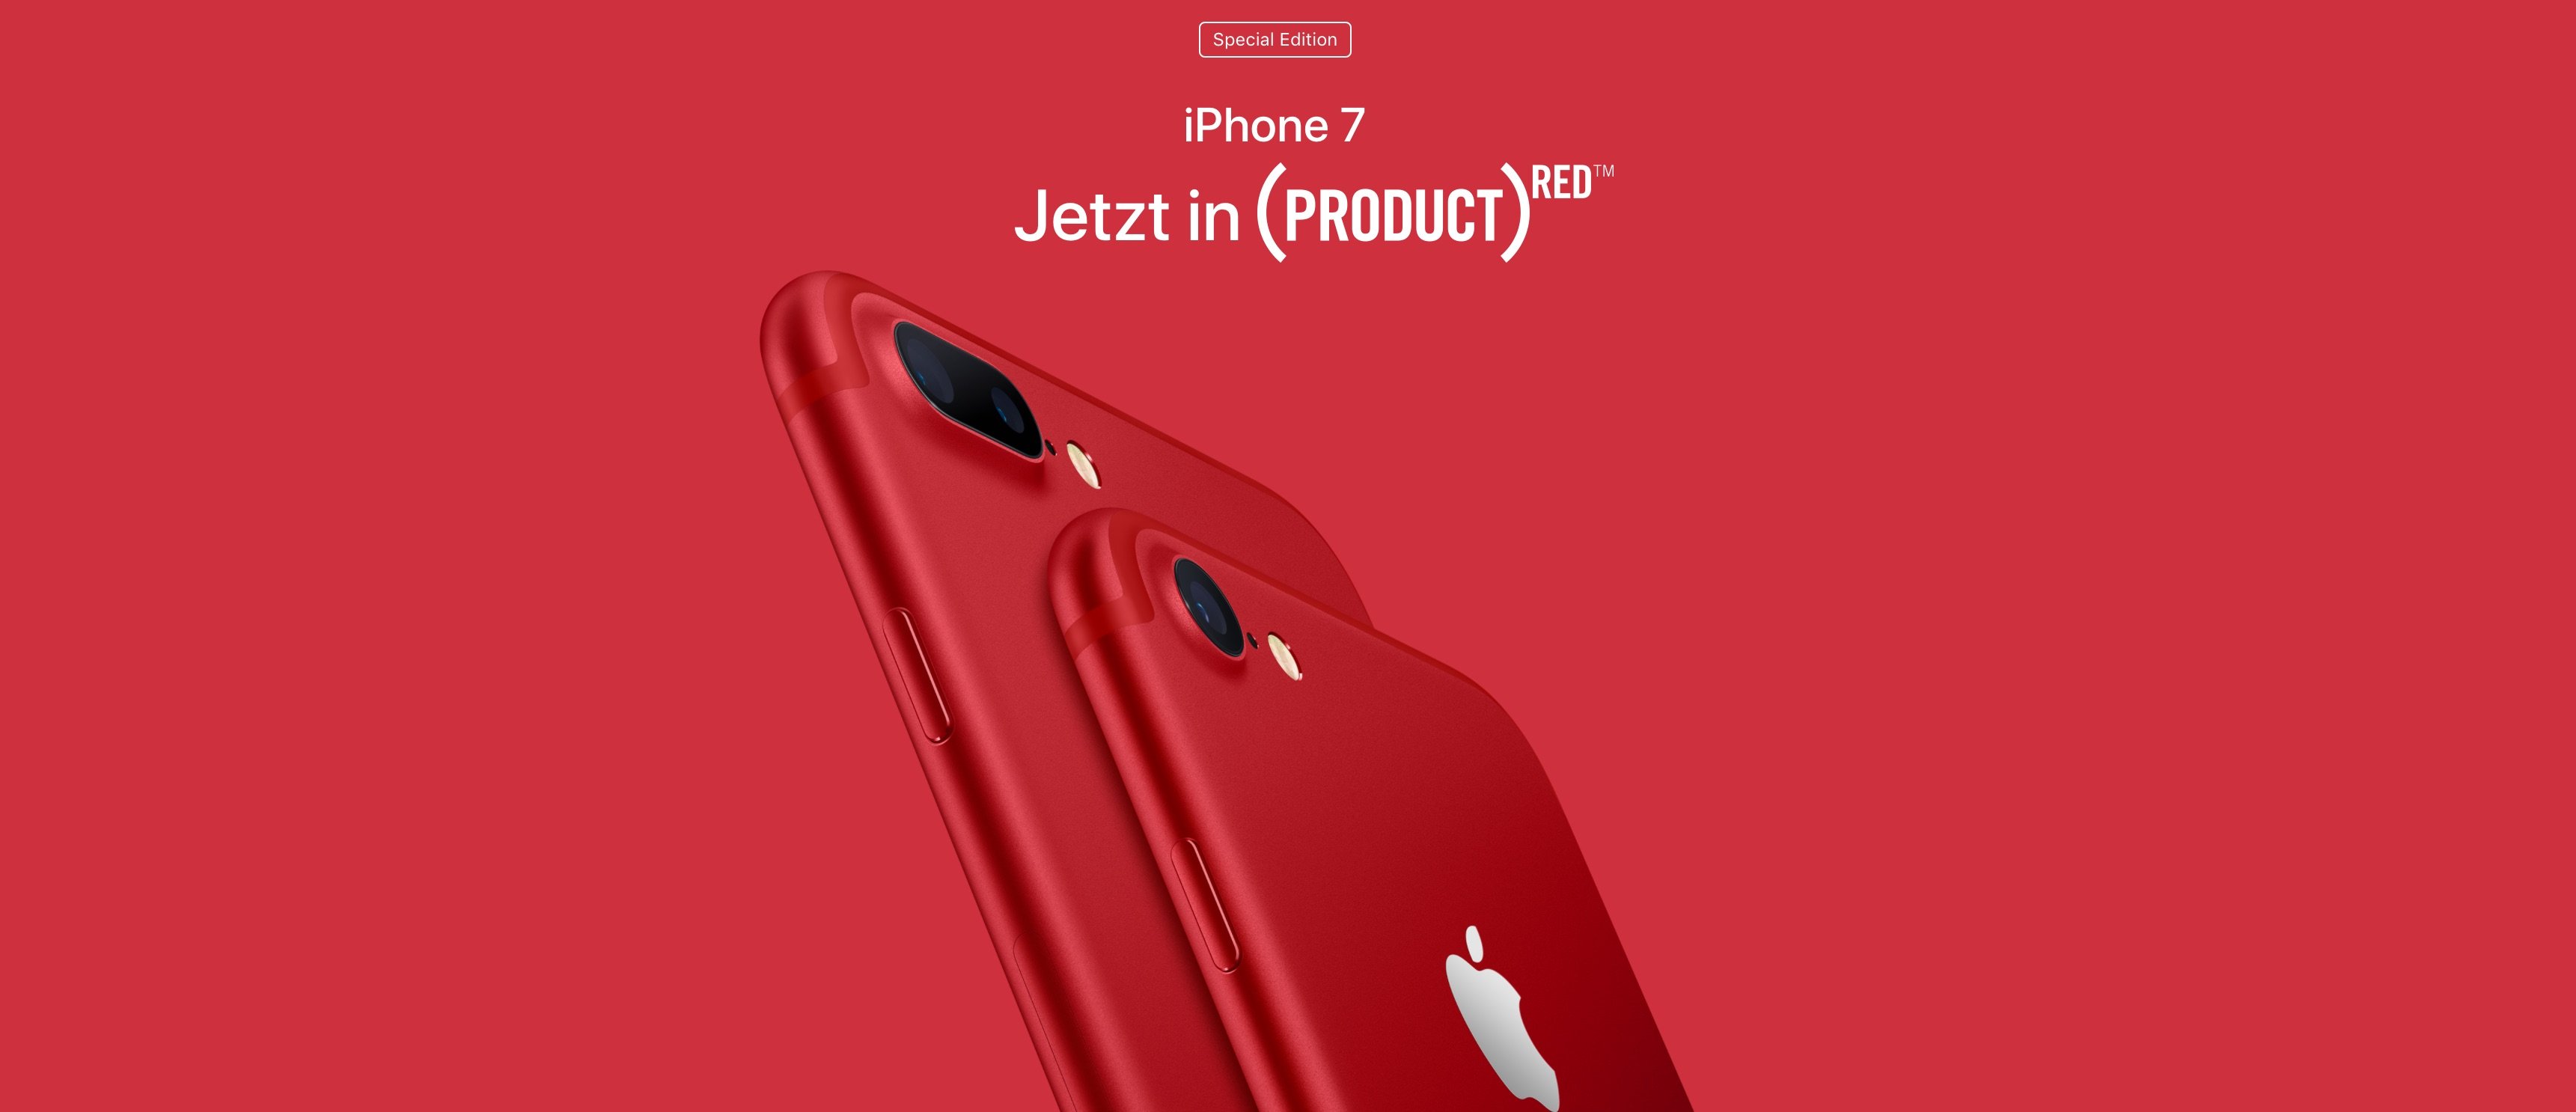 Apple iPhone 7 RED im Hands-on Video 2